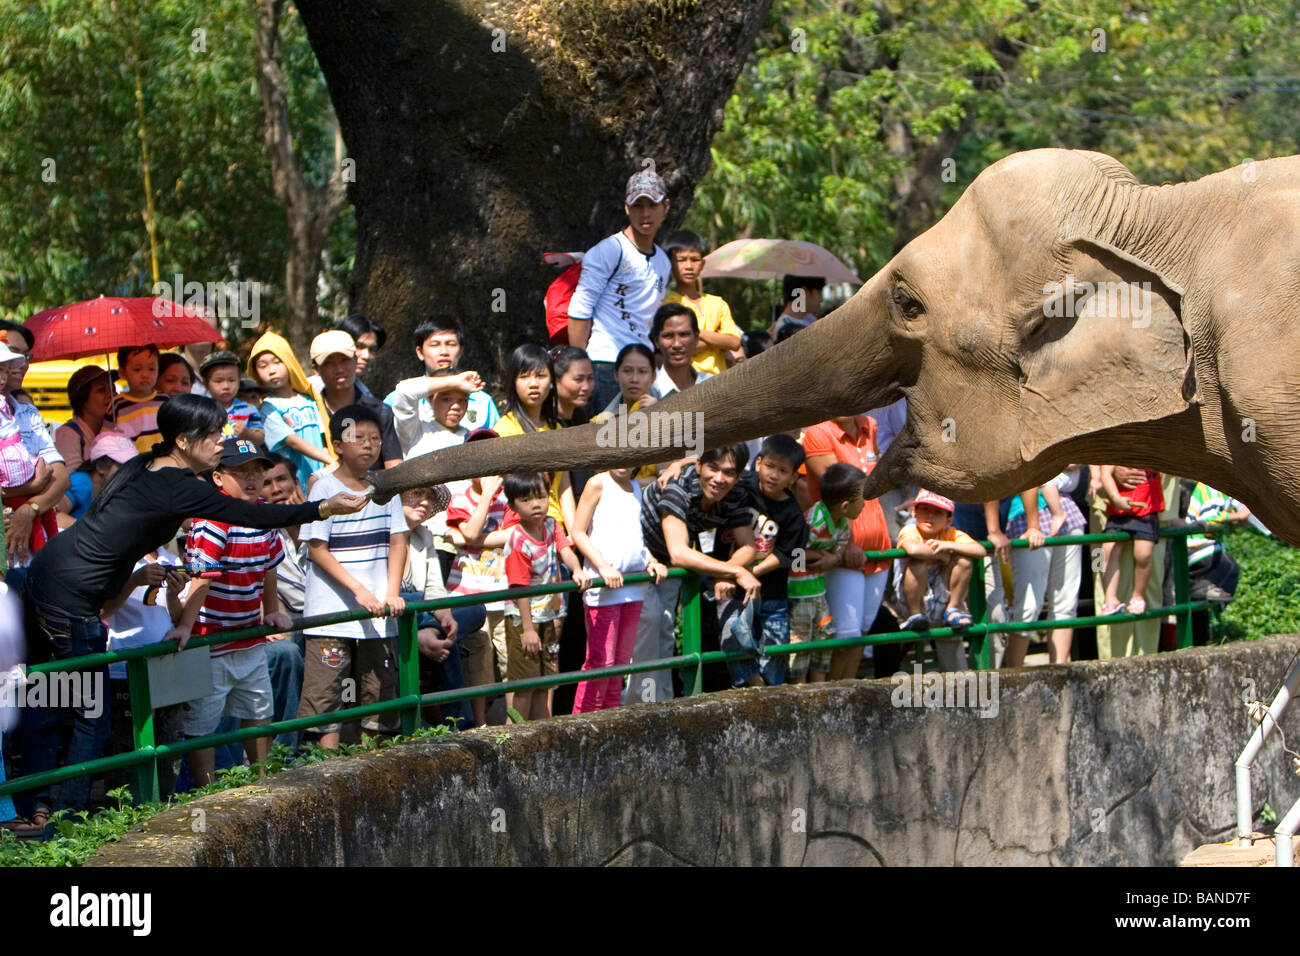 Visitors feed sugar cane to an asian elephant at the Saigon Zoo and Botanical Gardens in Ho Chi Minh City Vietnam Stock Photo